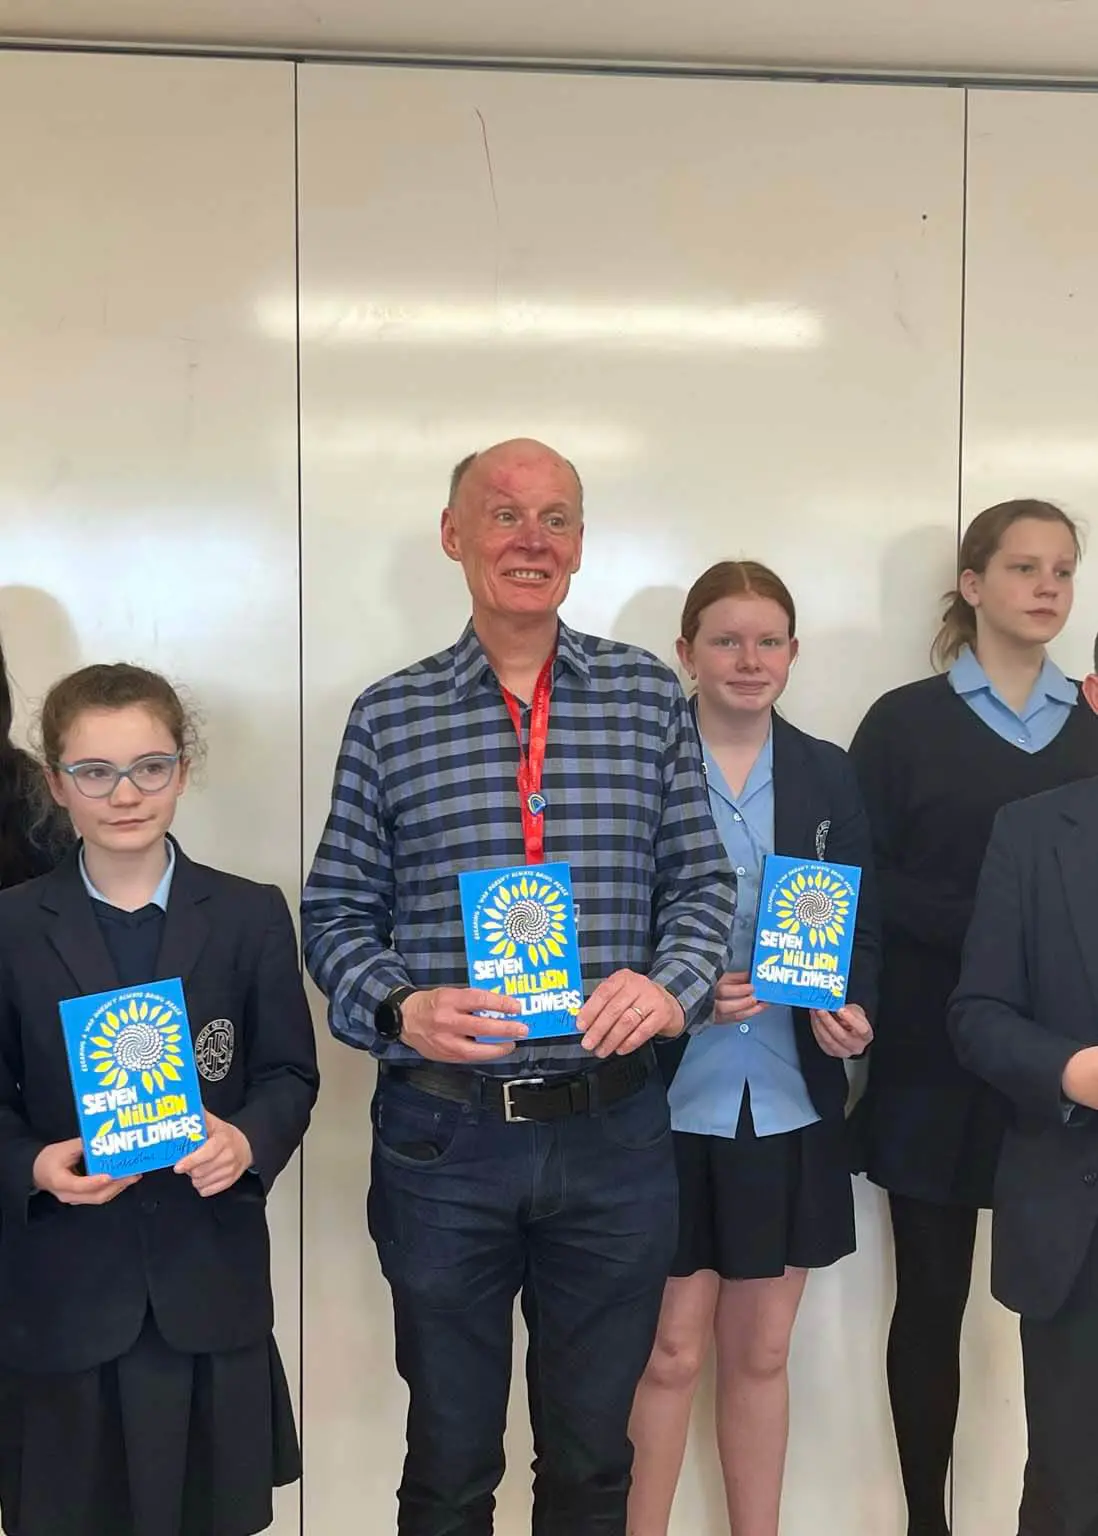 Pupils standing with Malcolm Duffy with his books in their hands.